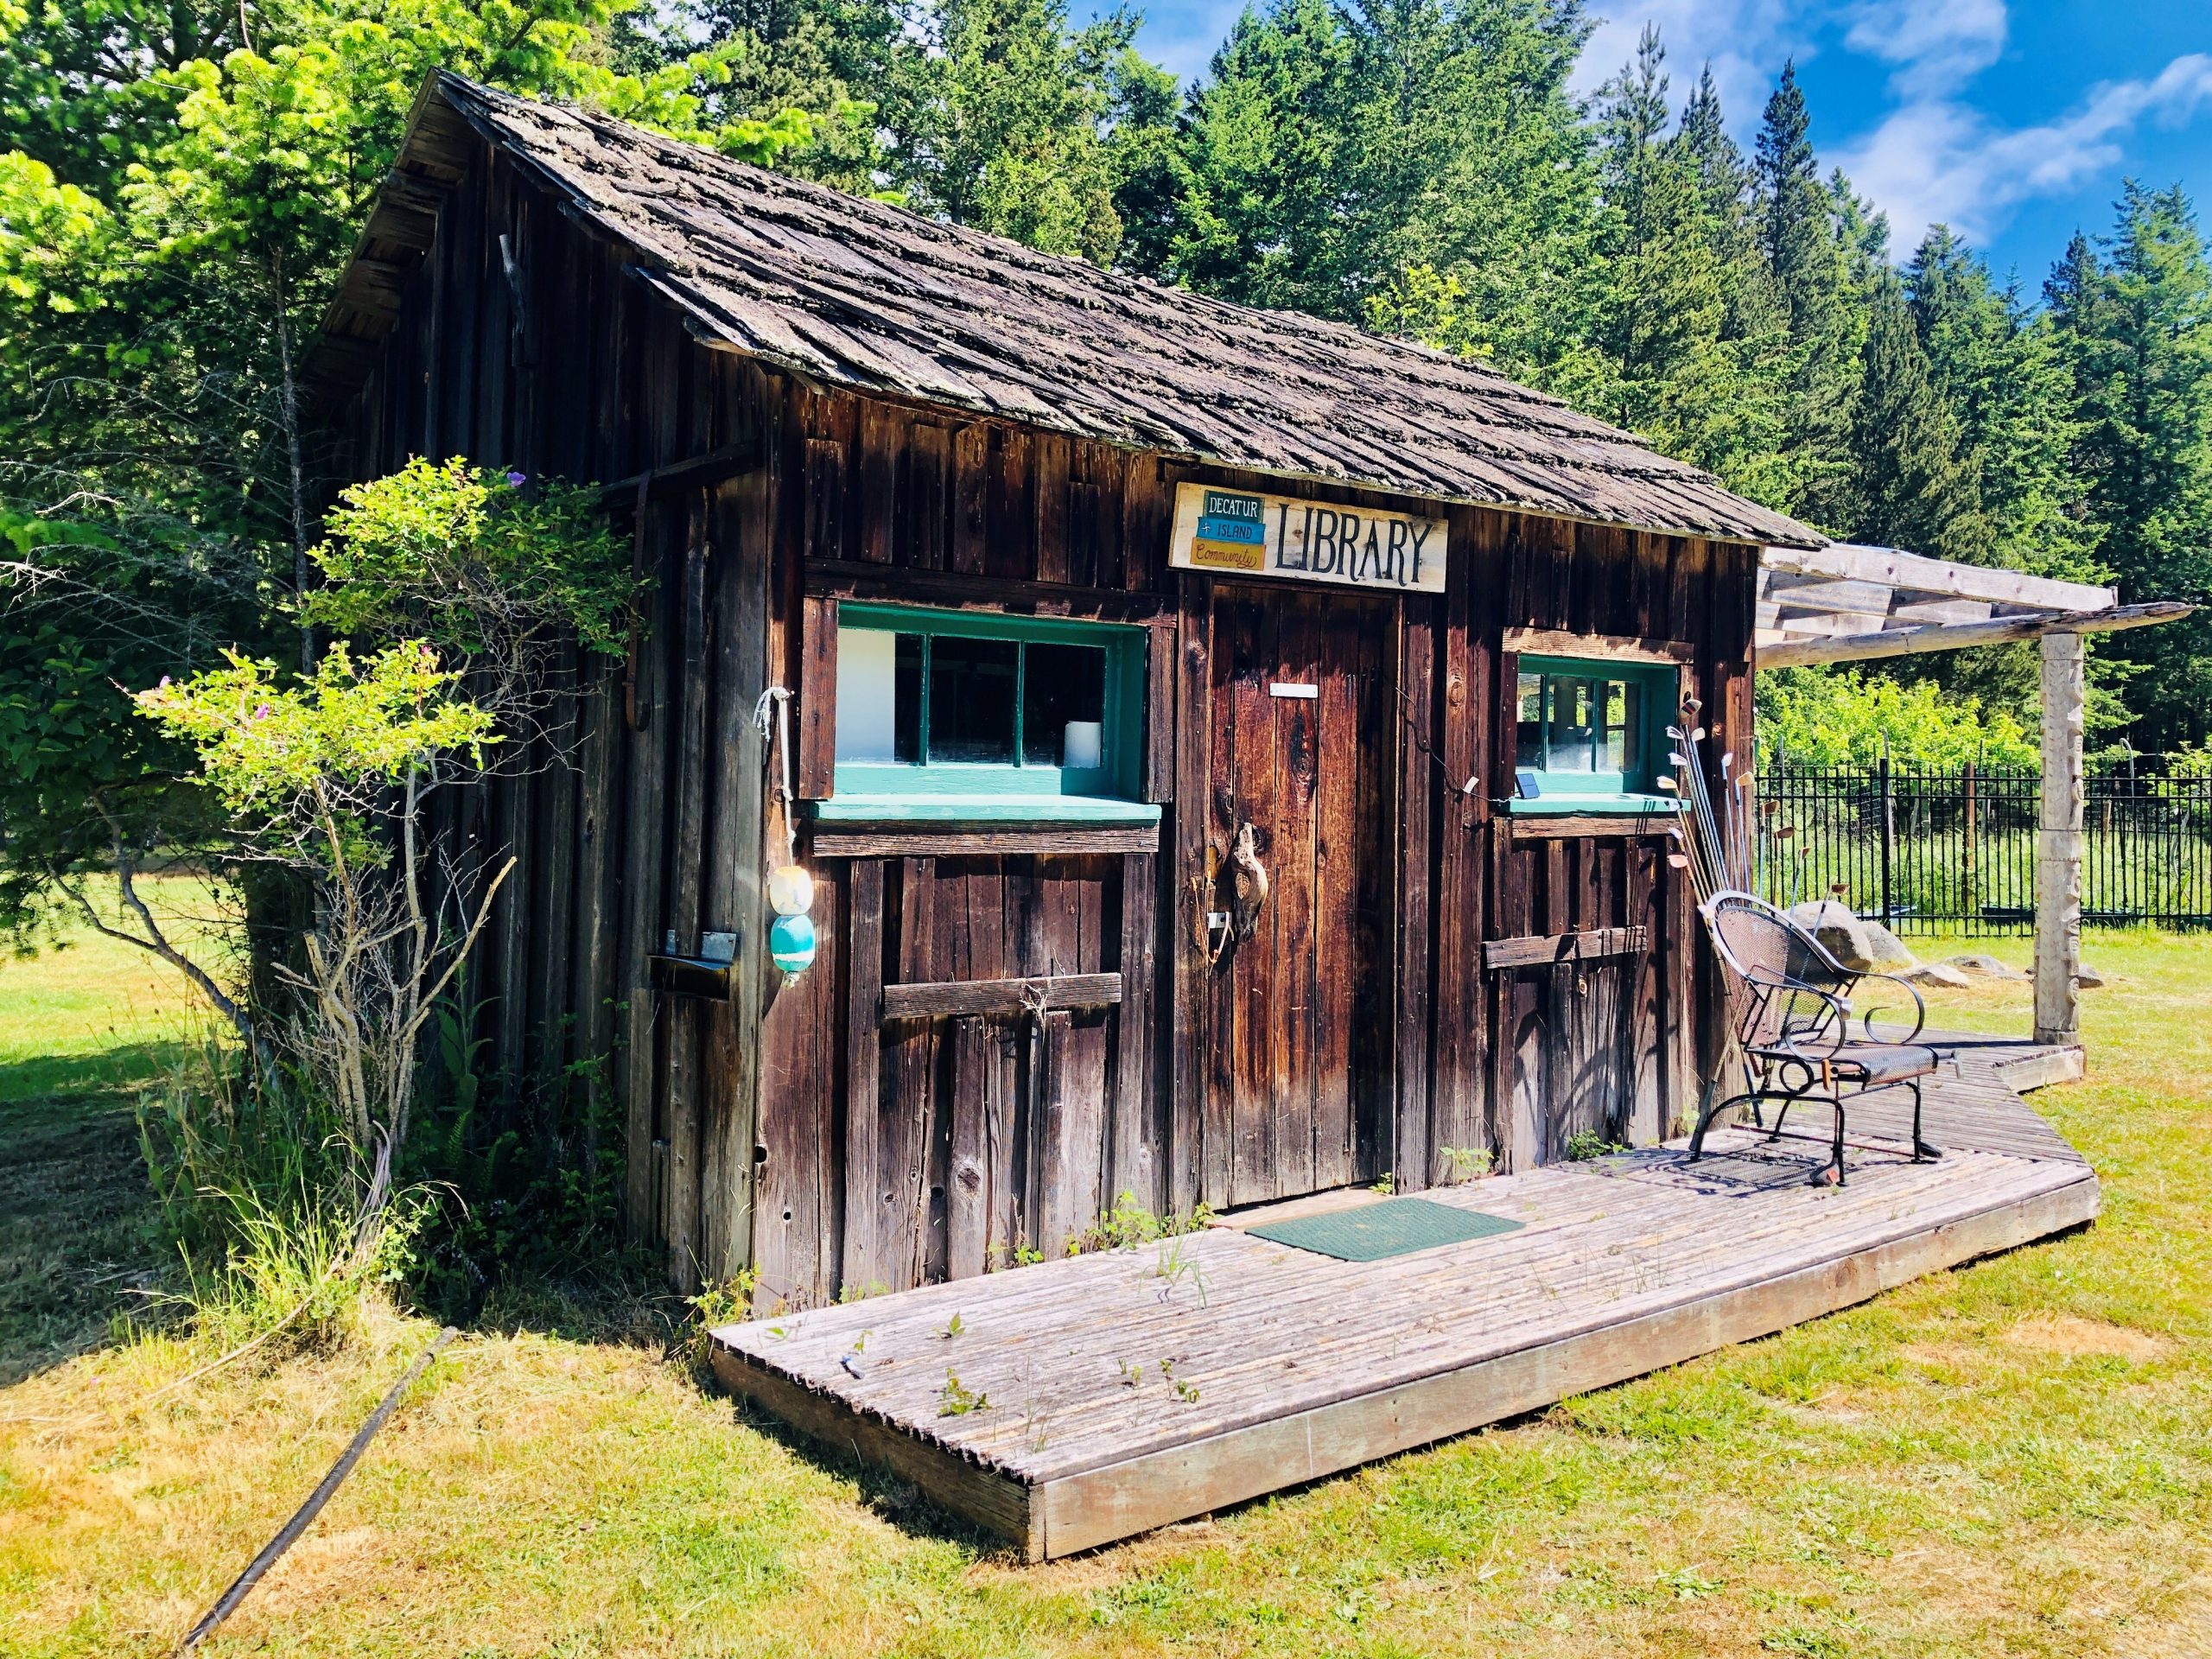 A small. weathered wood shed serves as the community library on Decatur Island